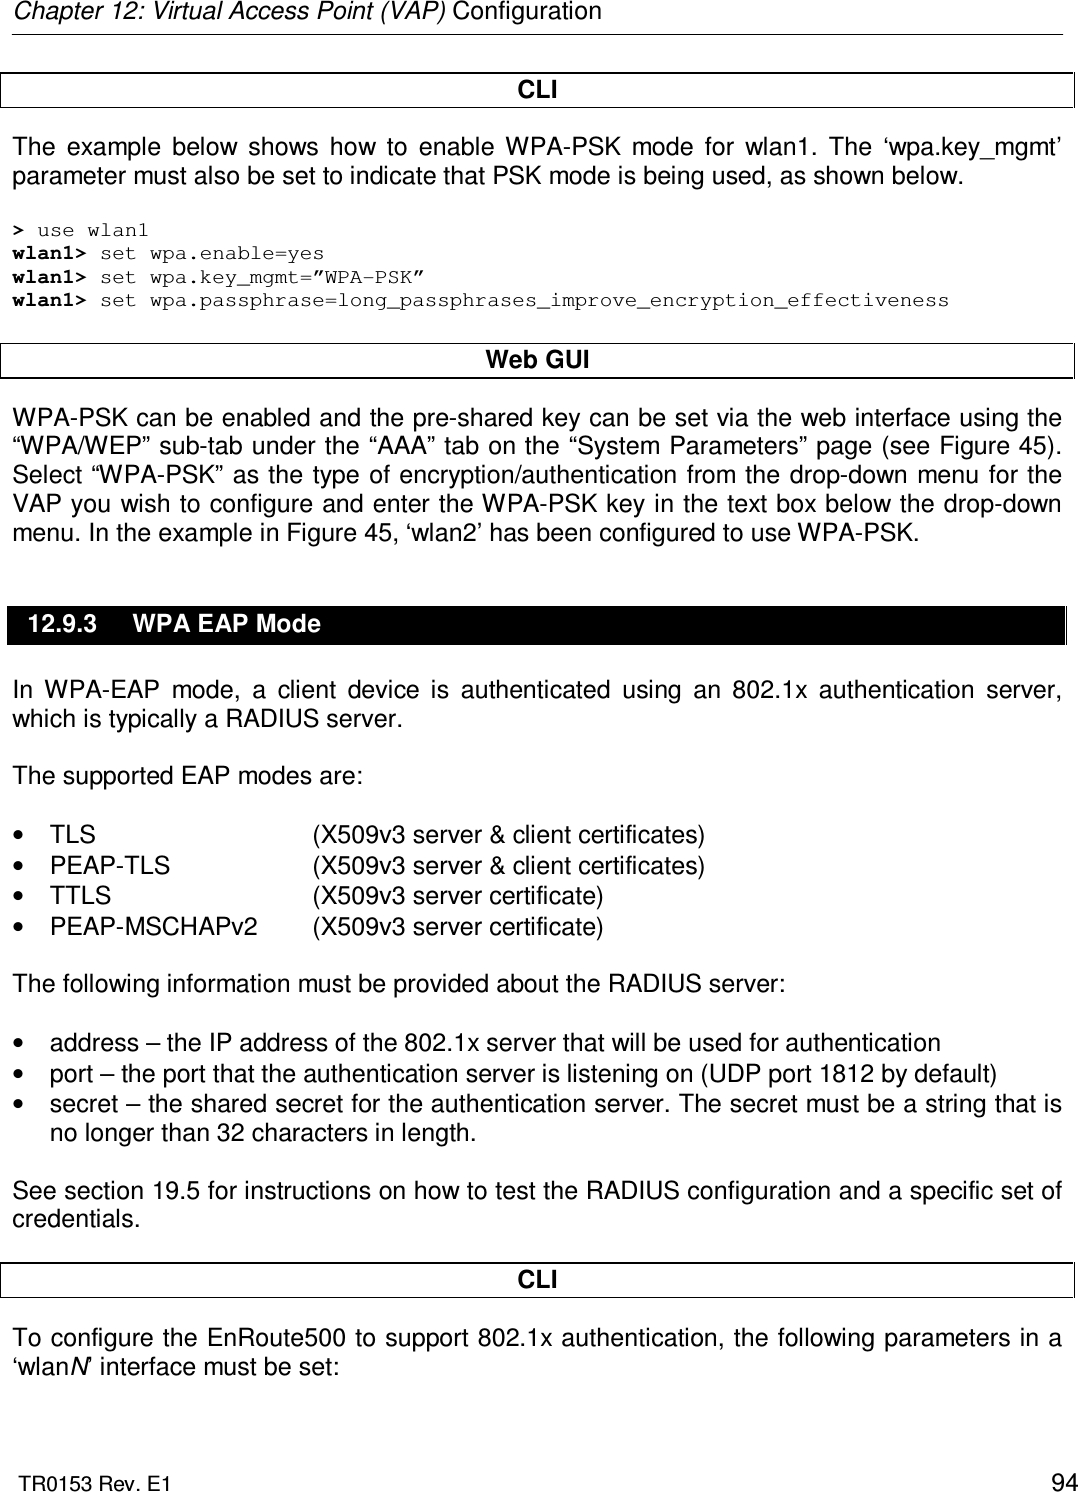 Chapter 12: Virtual Access Point (VAP) Configuration  TR0153 Rev. E1    94 CLI The  example  below  shows  how  to  enable  WPA-PSK  mode  for  wlan1.  The  ‘wpa.key_mgmt’ parameter must also be set to indicate that PSK mode is being used, as shown below.  &gt; use wlan1 wlan1&gt; set wpa.enable=yes wlan1&gt; set wpa.key_mgmt=”WPA-PSK” wlan1&gt; set wpa.passphrase=long_passphrases_improve_encryption_effectiveness  Web GUI WPA-PSK can be enabled and the pre-shared key can be set via the web interface using the “WPA/WEP” sub-tab under the “AAA” tab on the “System Parameters” page (see Figure 45). Select “WPA-PSK” as the type of encryption/authentication from  the drop-down menu for the VAP you wish to configure and enter the WPA-PSK key in the text box below the drop-down menu. In the example in Figure 45, ‘wlan2’ has been configured to use WPA-PSK. 12.9.3  WPA EAP Mode In  WPA-EAP  mode,  a  client  device  is  authenticated  using  an  802.1x  authentication  server, which is typically a RADIUS server.   The supported EAP modes are:  •  TLS      (X509v3 server &amp; client certificates) •  PEAP-TLS    (X509v3 server &amp; client certificates) •  TTLS      (X509v3 server certificate) •  PEAP-MSCHAPv2  (X509v3 server certificate)  The following information must be provided about the RADIUS server:  •  address – the IP address of the 802.1x server that will be used for authentication •  port – the port that the authentication server is listening on (UDP port 1812 by default) •  secret – the shared secret for the authentication server. The secret must be a string that is no longer than 32 characters in length.  See section 19.5 for instructions on how to test the RADIUS configuration and a specific set of credentials.  CLI To configure the EnRoute500 to support 802.1x authentication, the following parameters in a ‘wlanN’ interface must be set:  